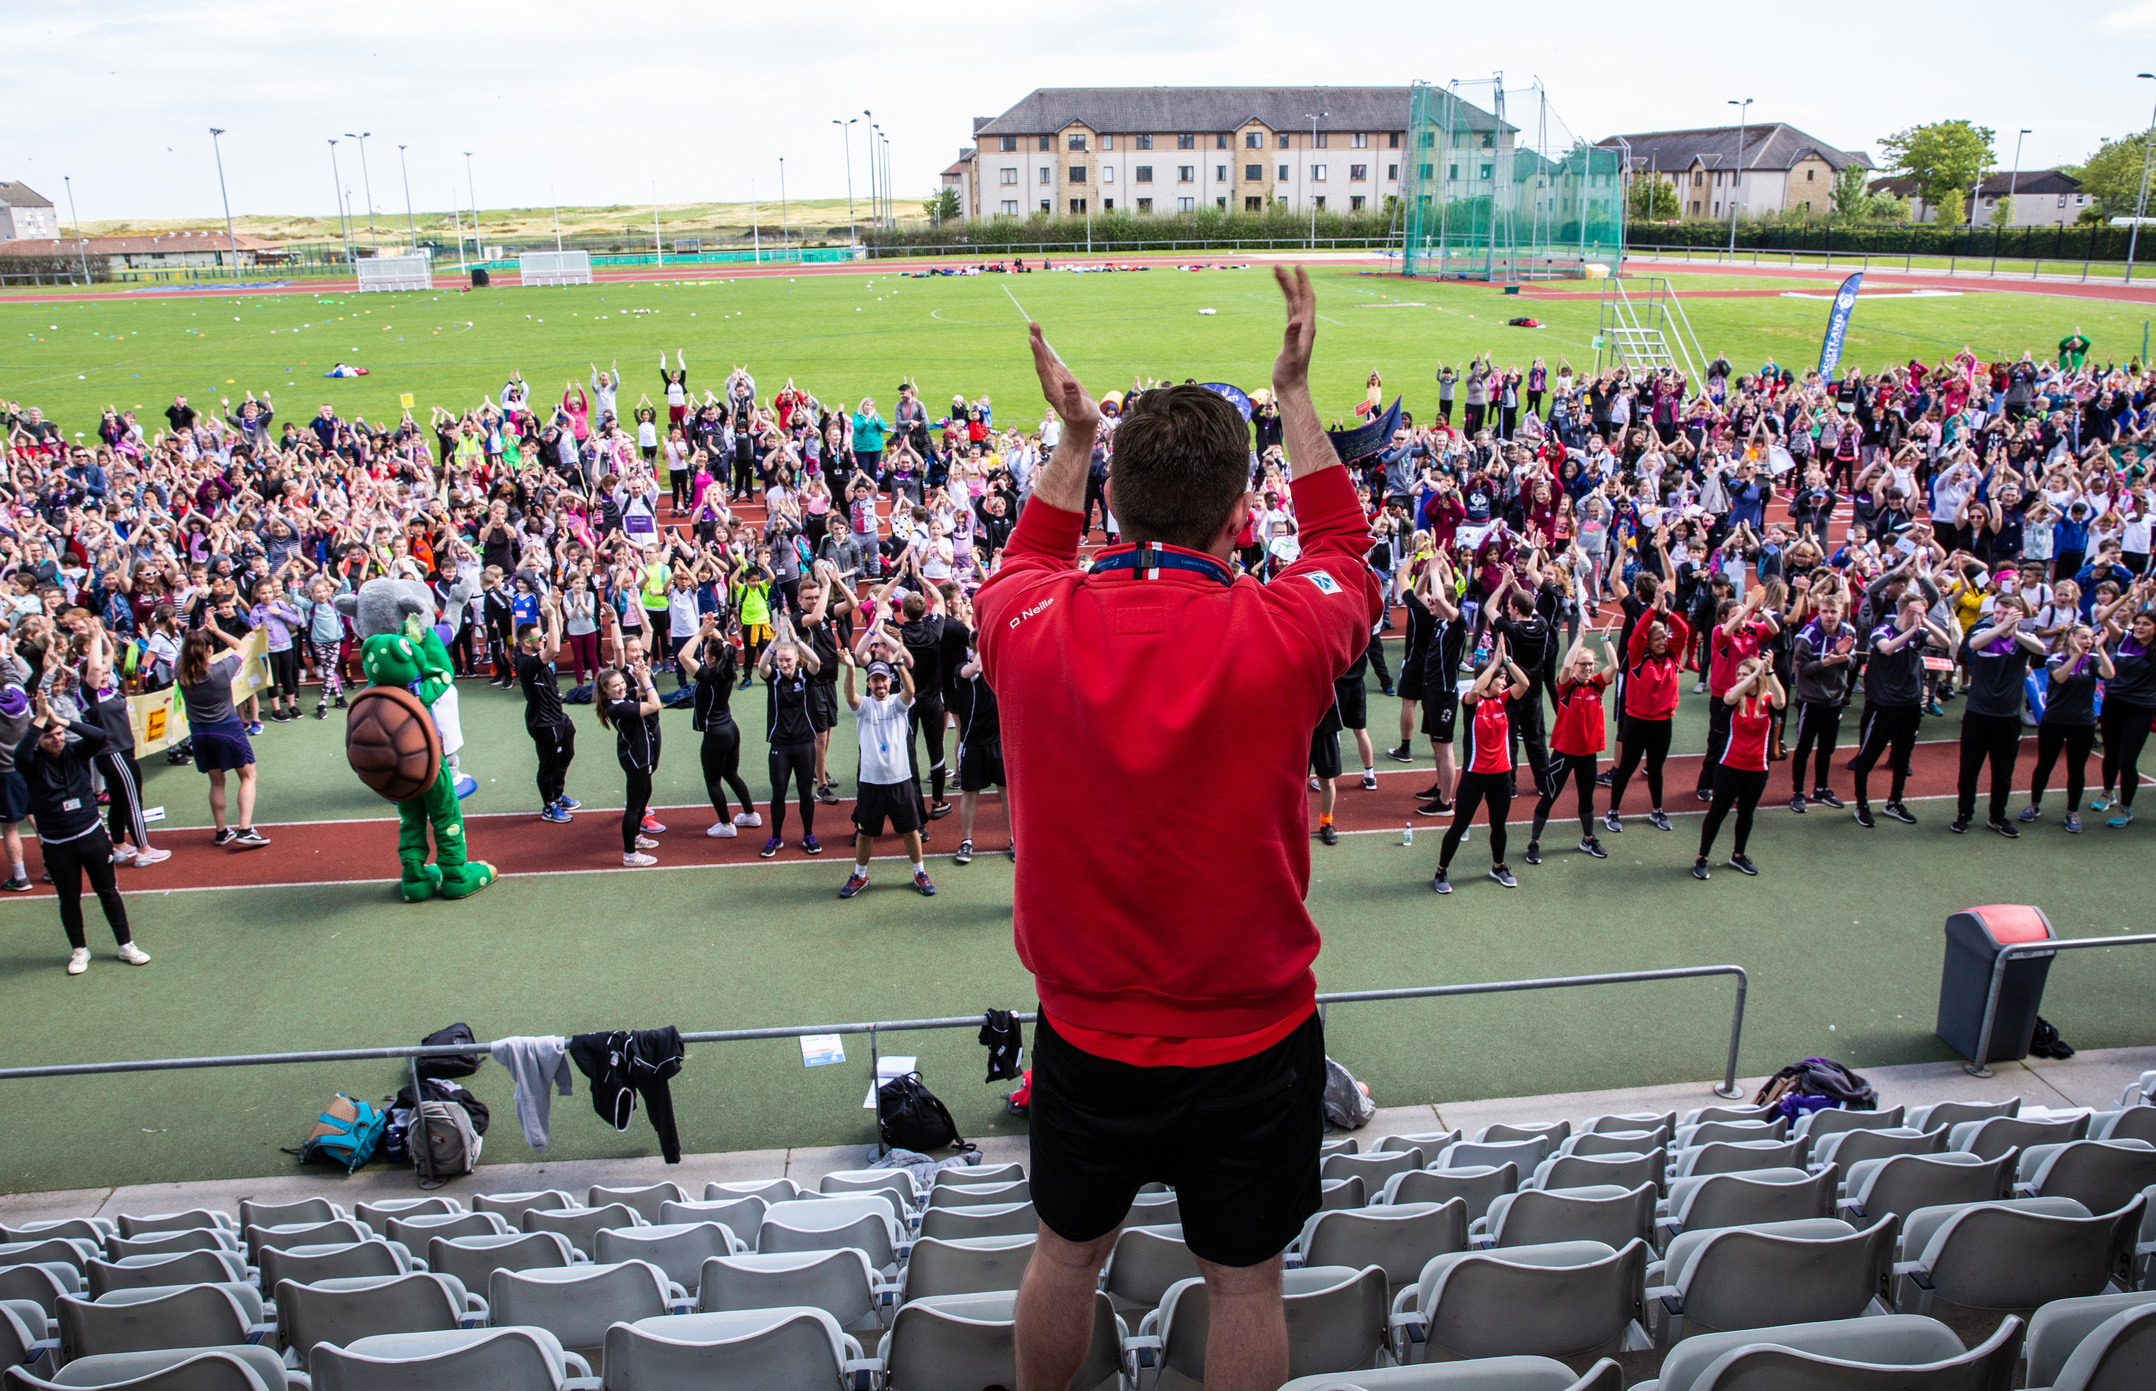 More than 1,500 primary pupils turned up for the 2019 Aberdeen Youth Games